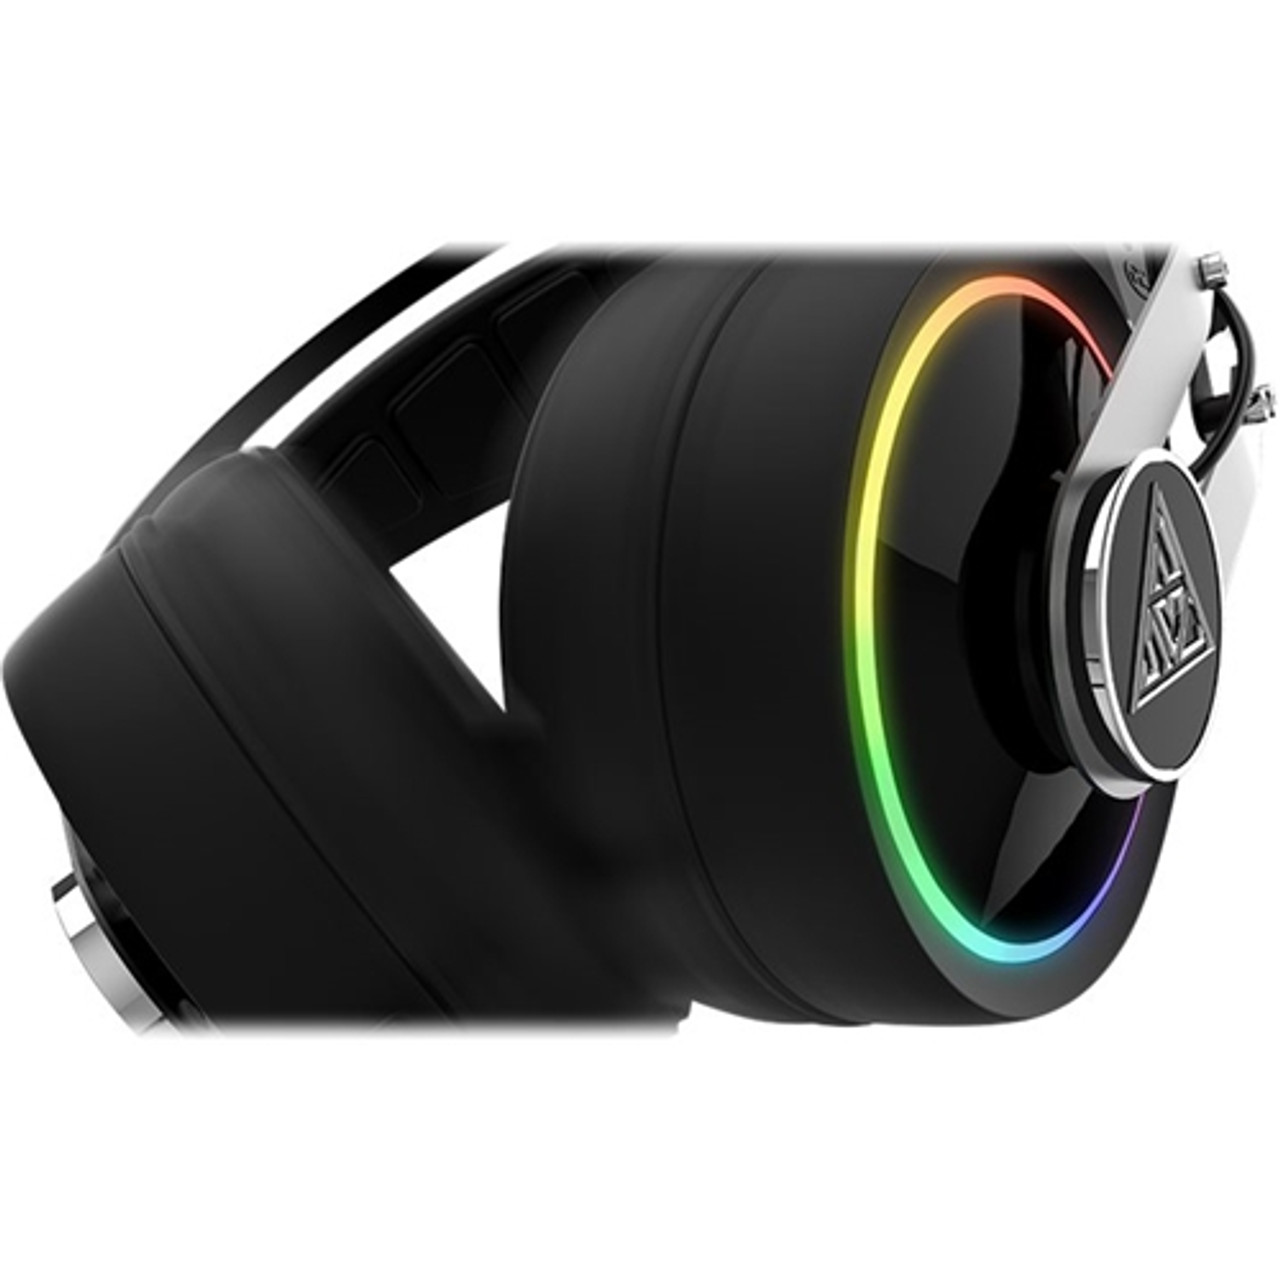 GAMDIAS - HEBE P1A RGB Wired Stereo Gaming Headset - Black